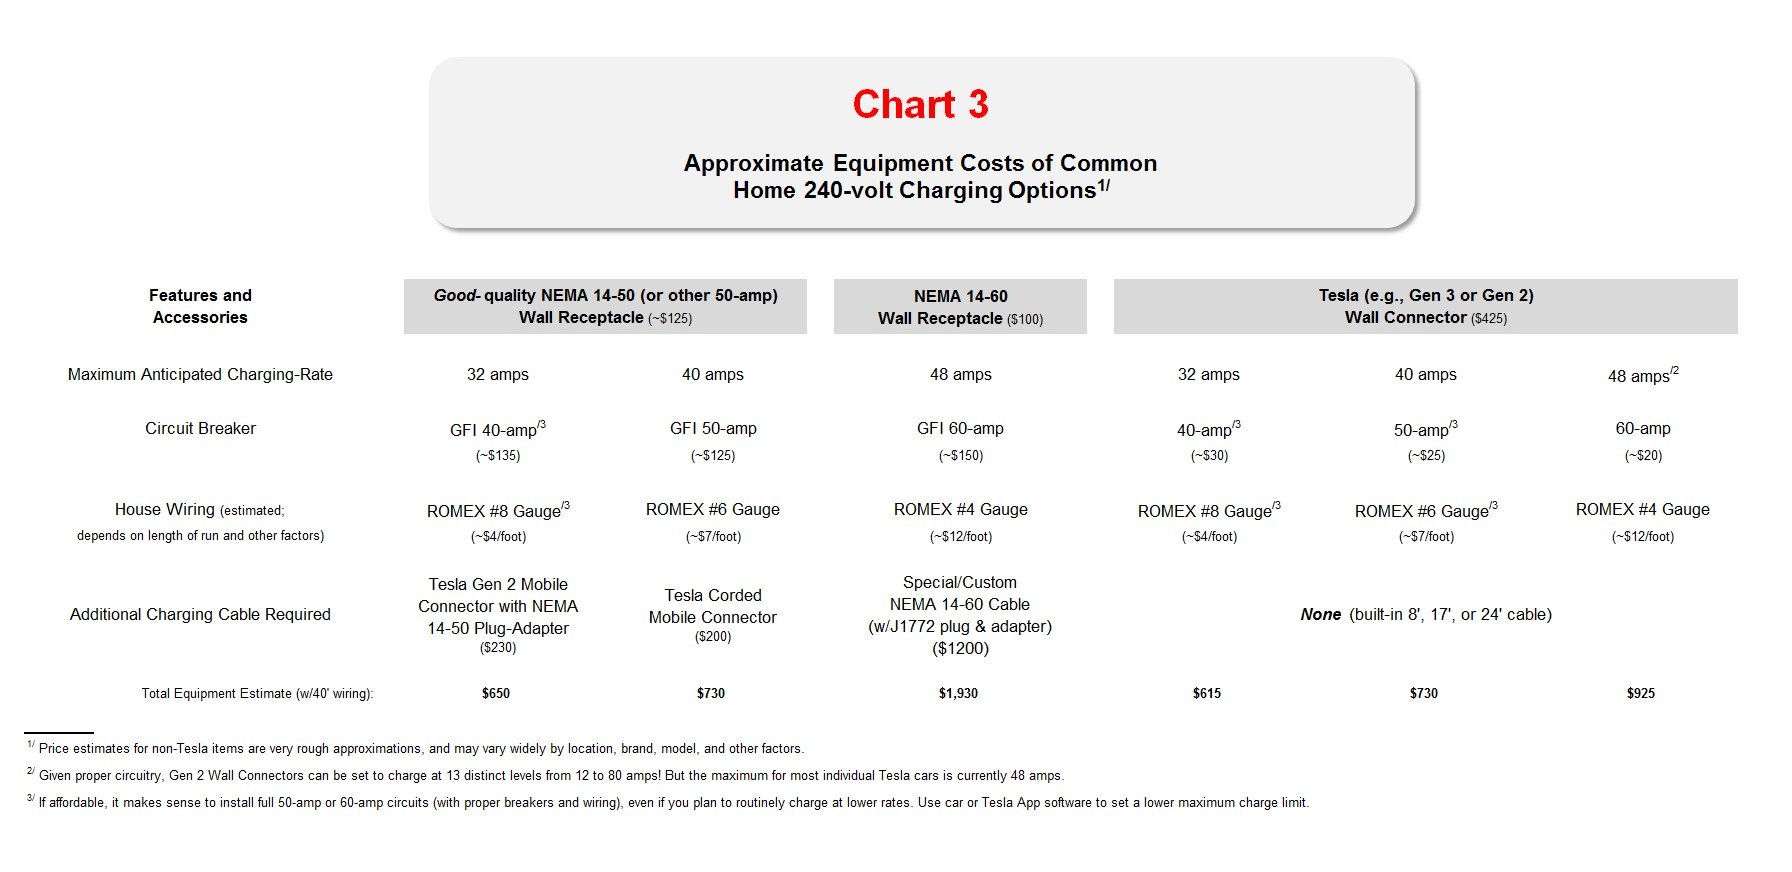 Approximate Equipment Cost of Common Home 240v Charging Options